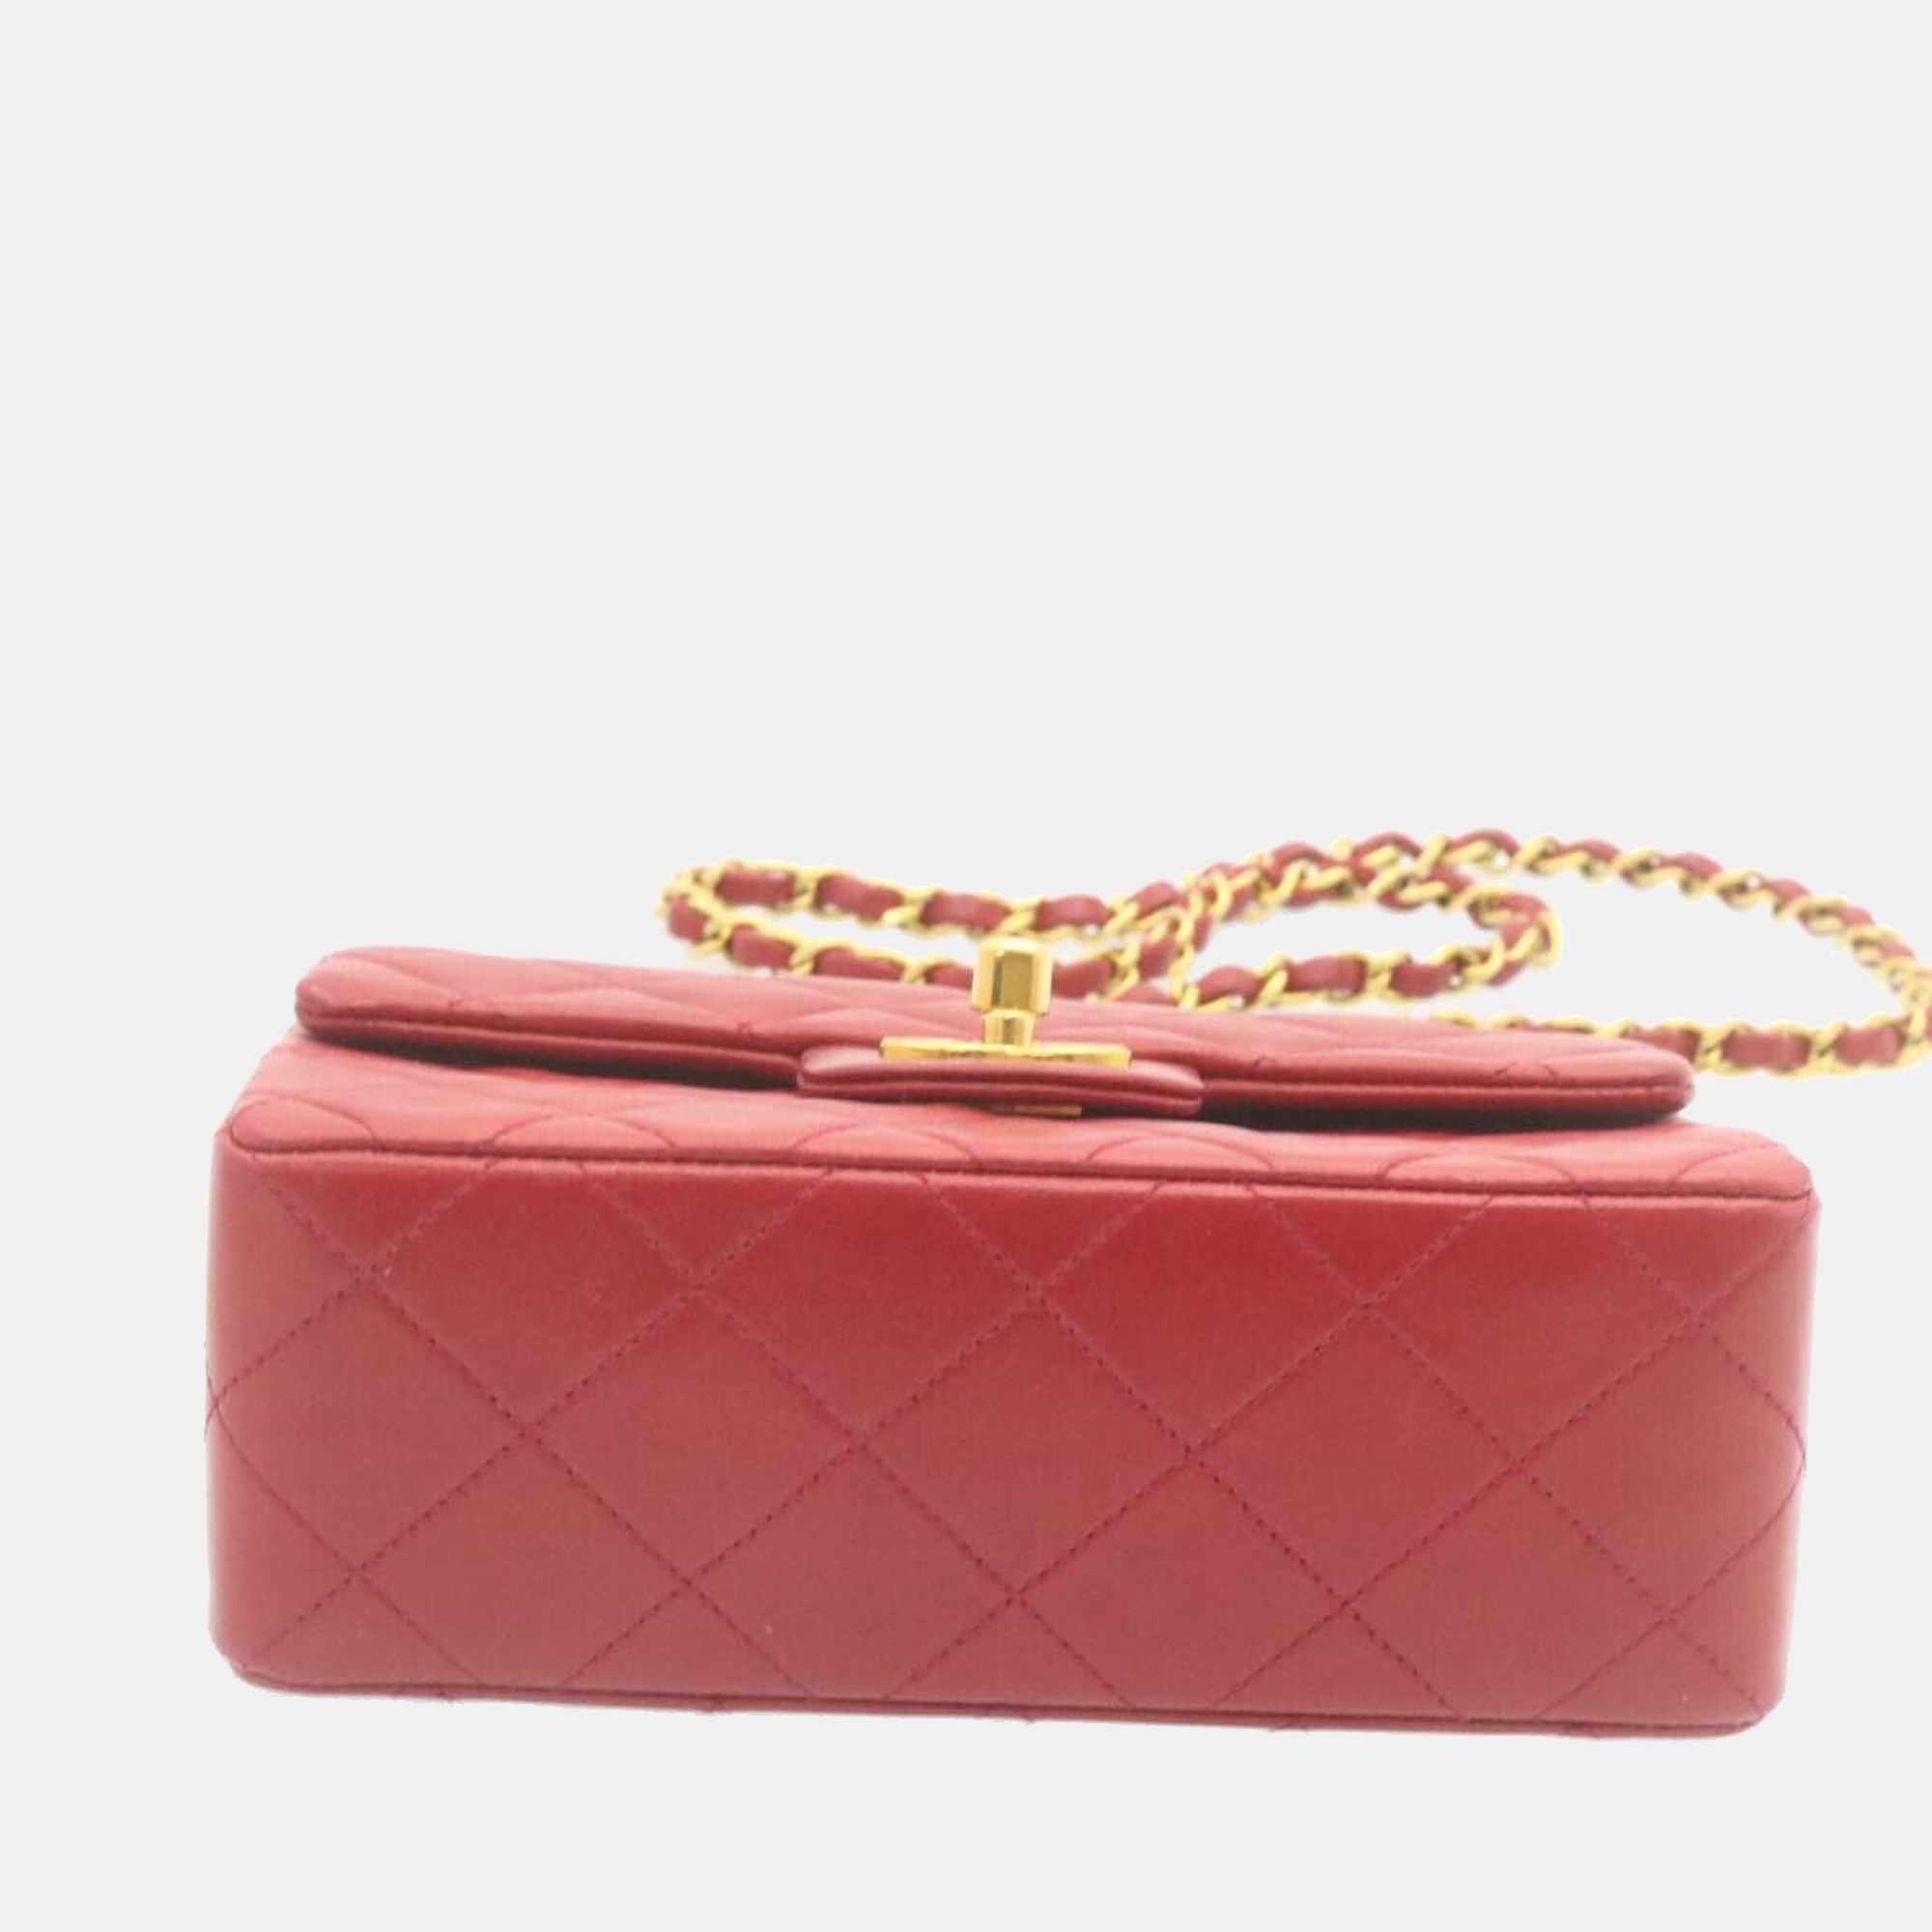 Chanel Red Lambskin Leather Mini Square Flap Bag